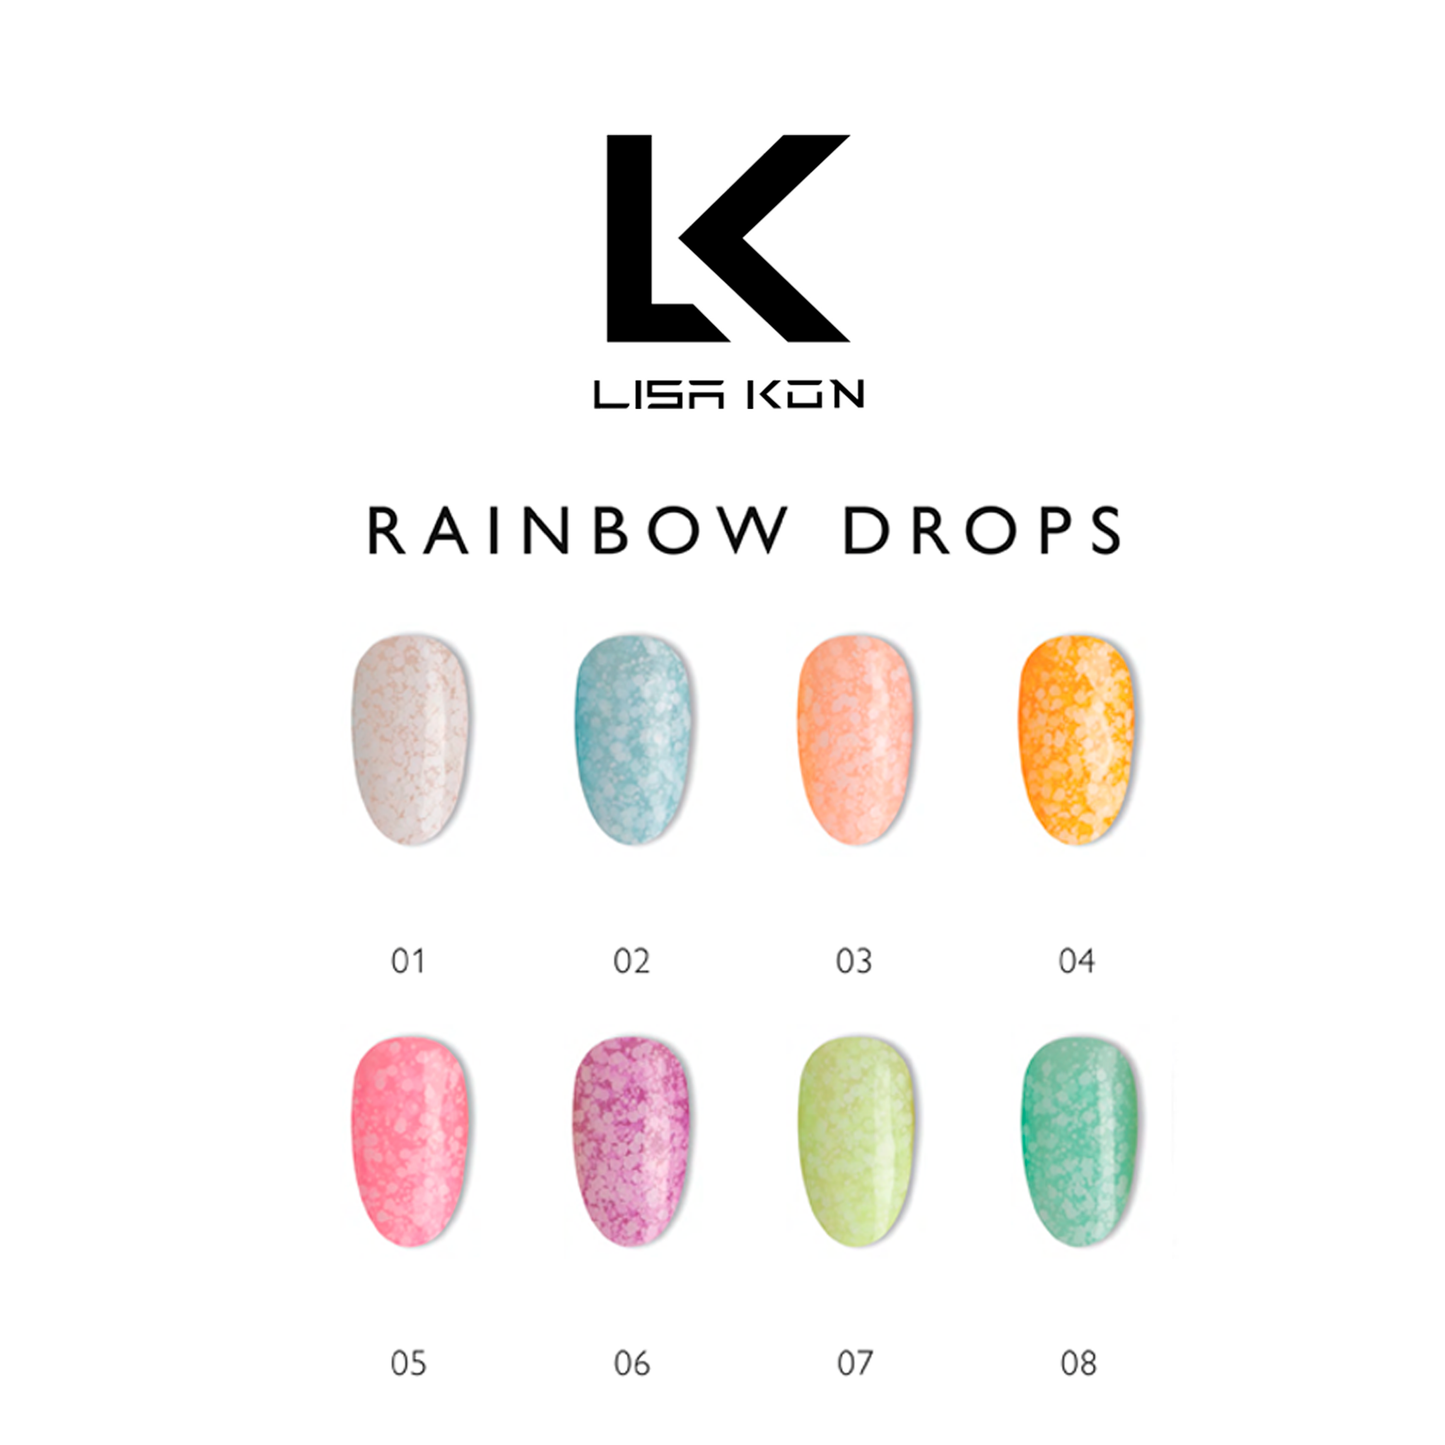 Rainbow drops Collection